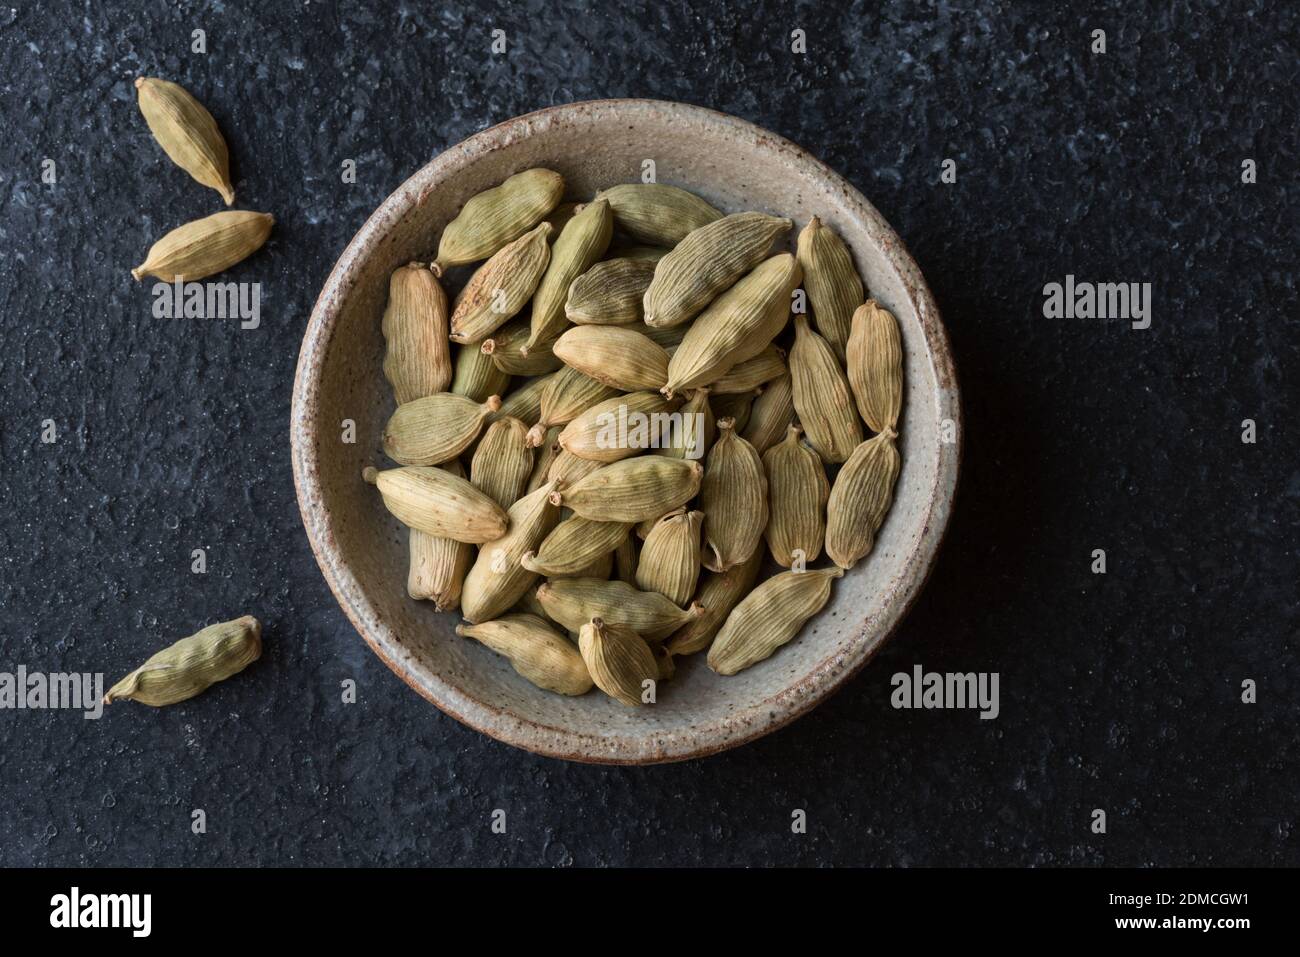 Directly Above Shot Of Cardamoms In Bowl On Table Stock Photo